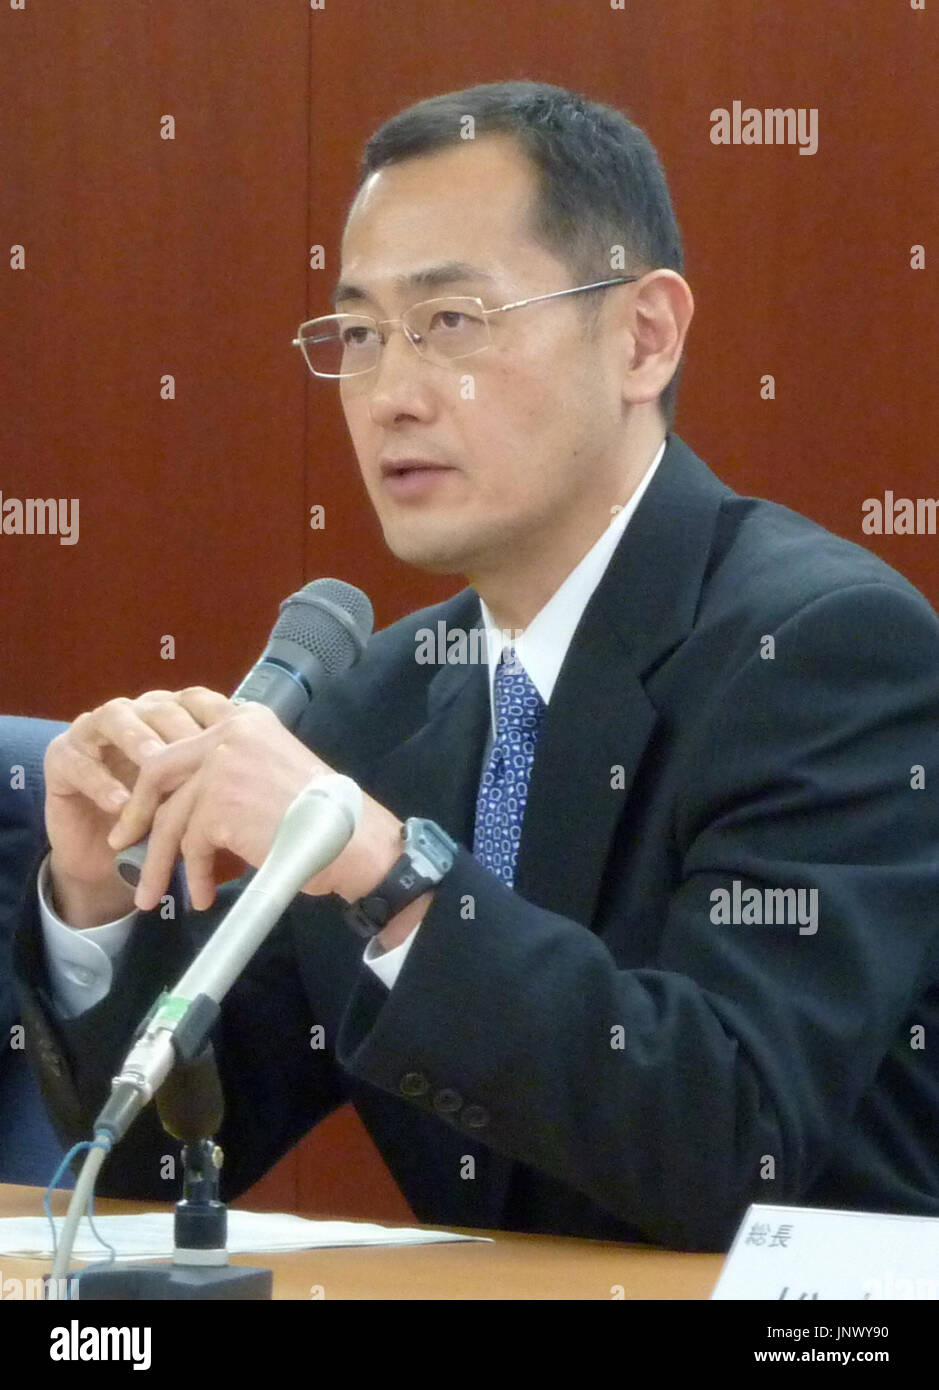 KYOTO, Japan - Kyoto University professor Shinya Yamanaka, who has developed induced pluripotent stem cell, or iPSC, technologies, speaks at a press conference in Kyoto on Feb. 1, 2011, after U.S. venture iPierian Inc. assigned its patent estate for iPSCs to Kyoto University in a bid to avoid a dispute with Yamanaka. (Kyodo) Stock Photo